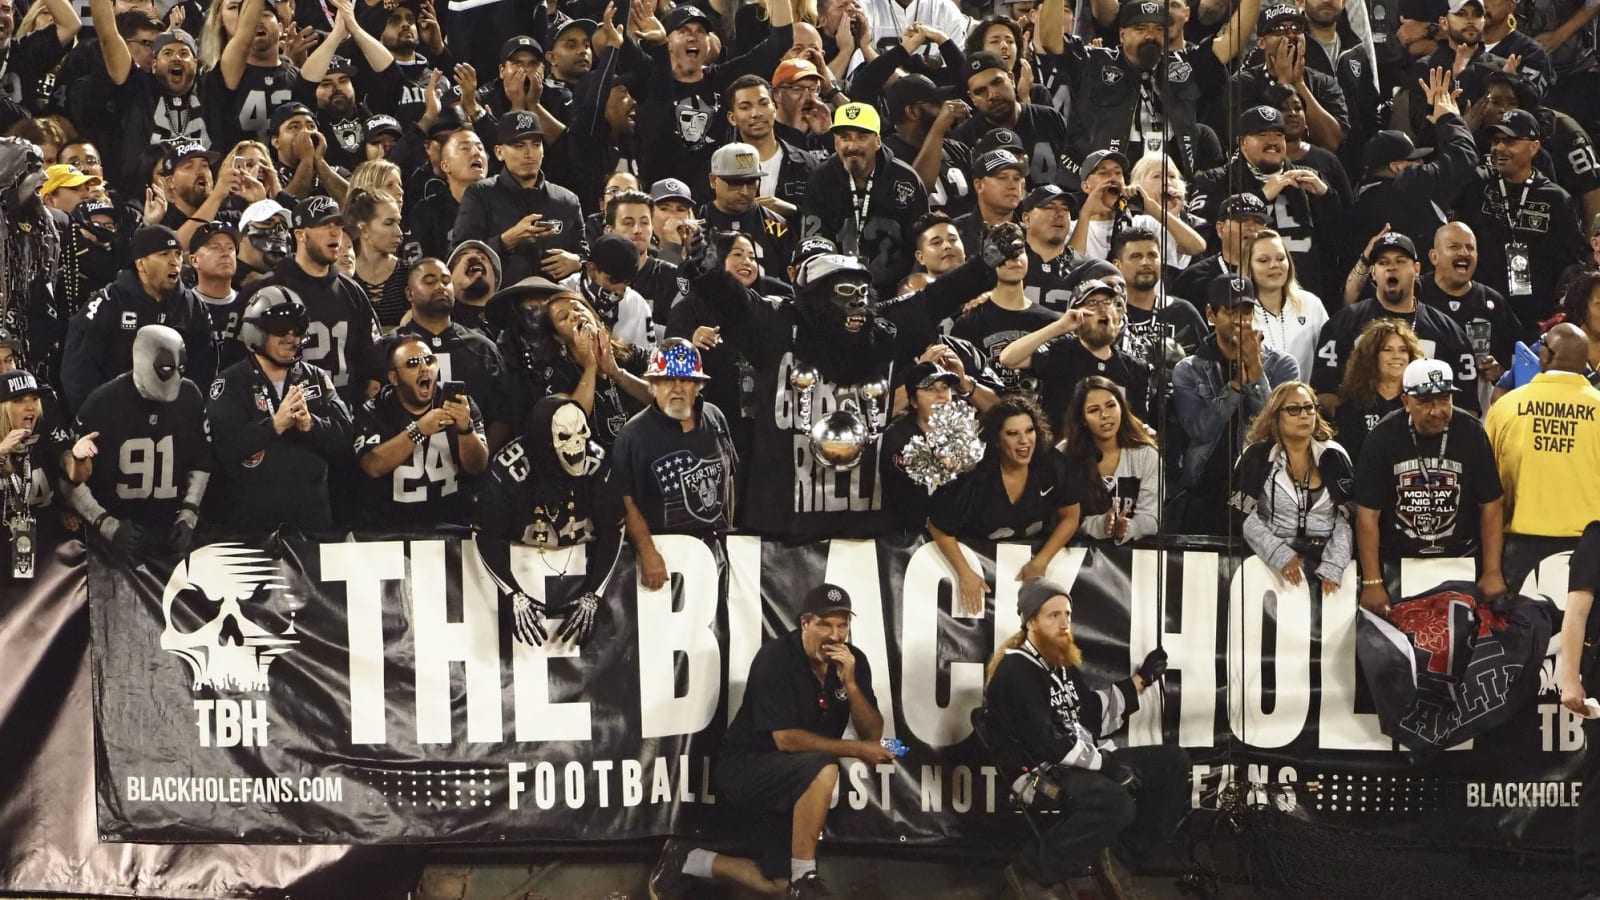 Raiders fans appear to be recreating ‘Black Hole’ in Las Vegas